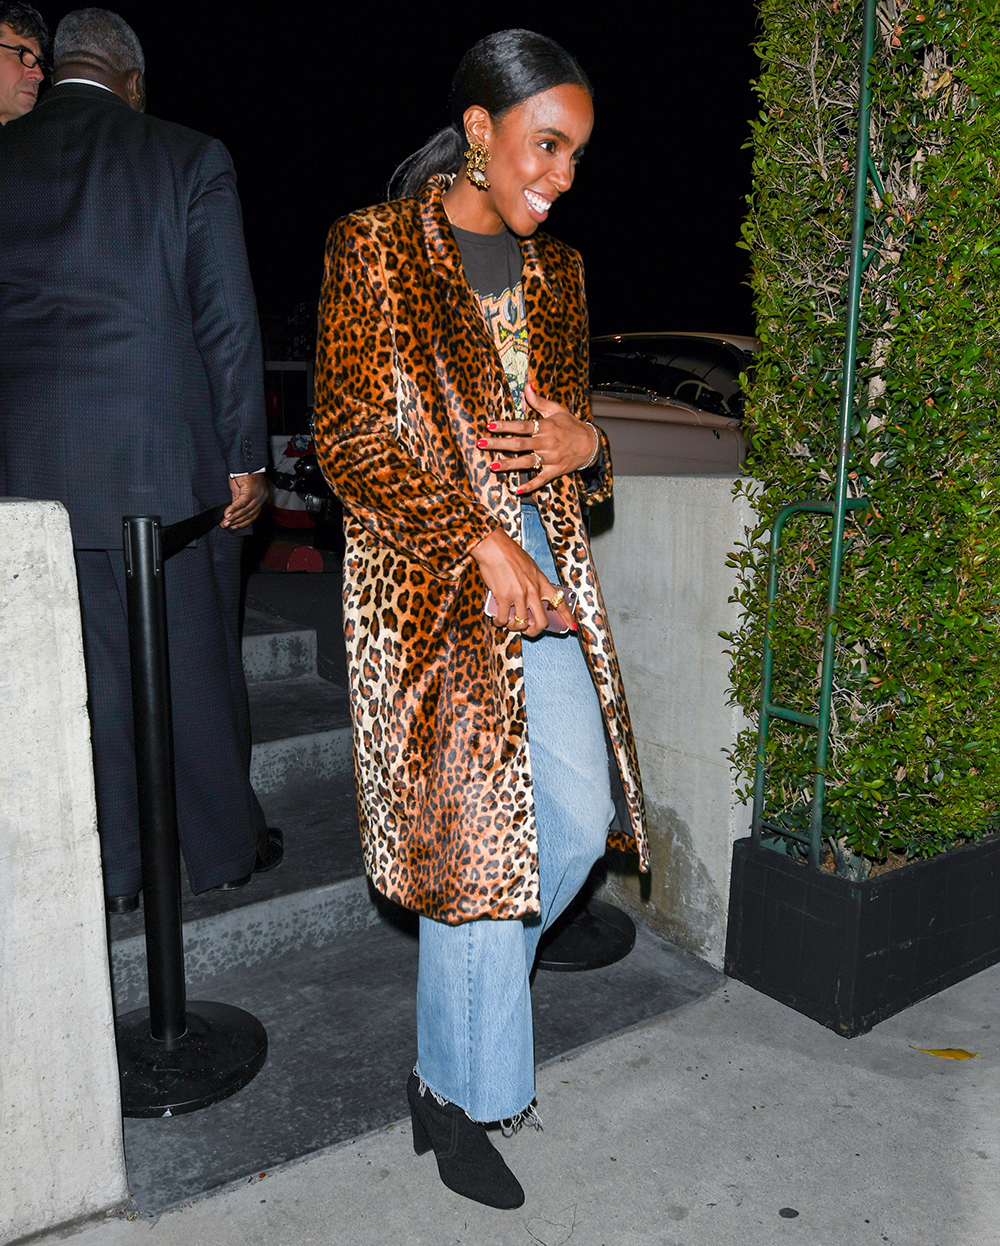 Kelly Rowland in a band t-shirt, jeans and a leopard print jacket.